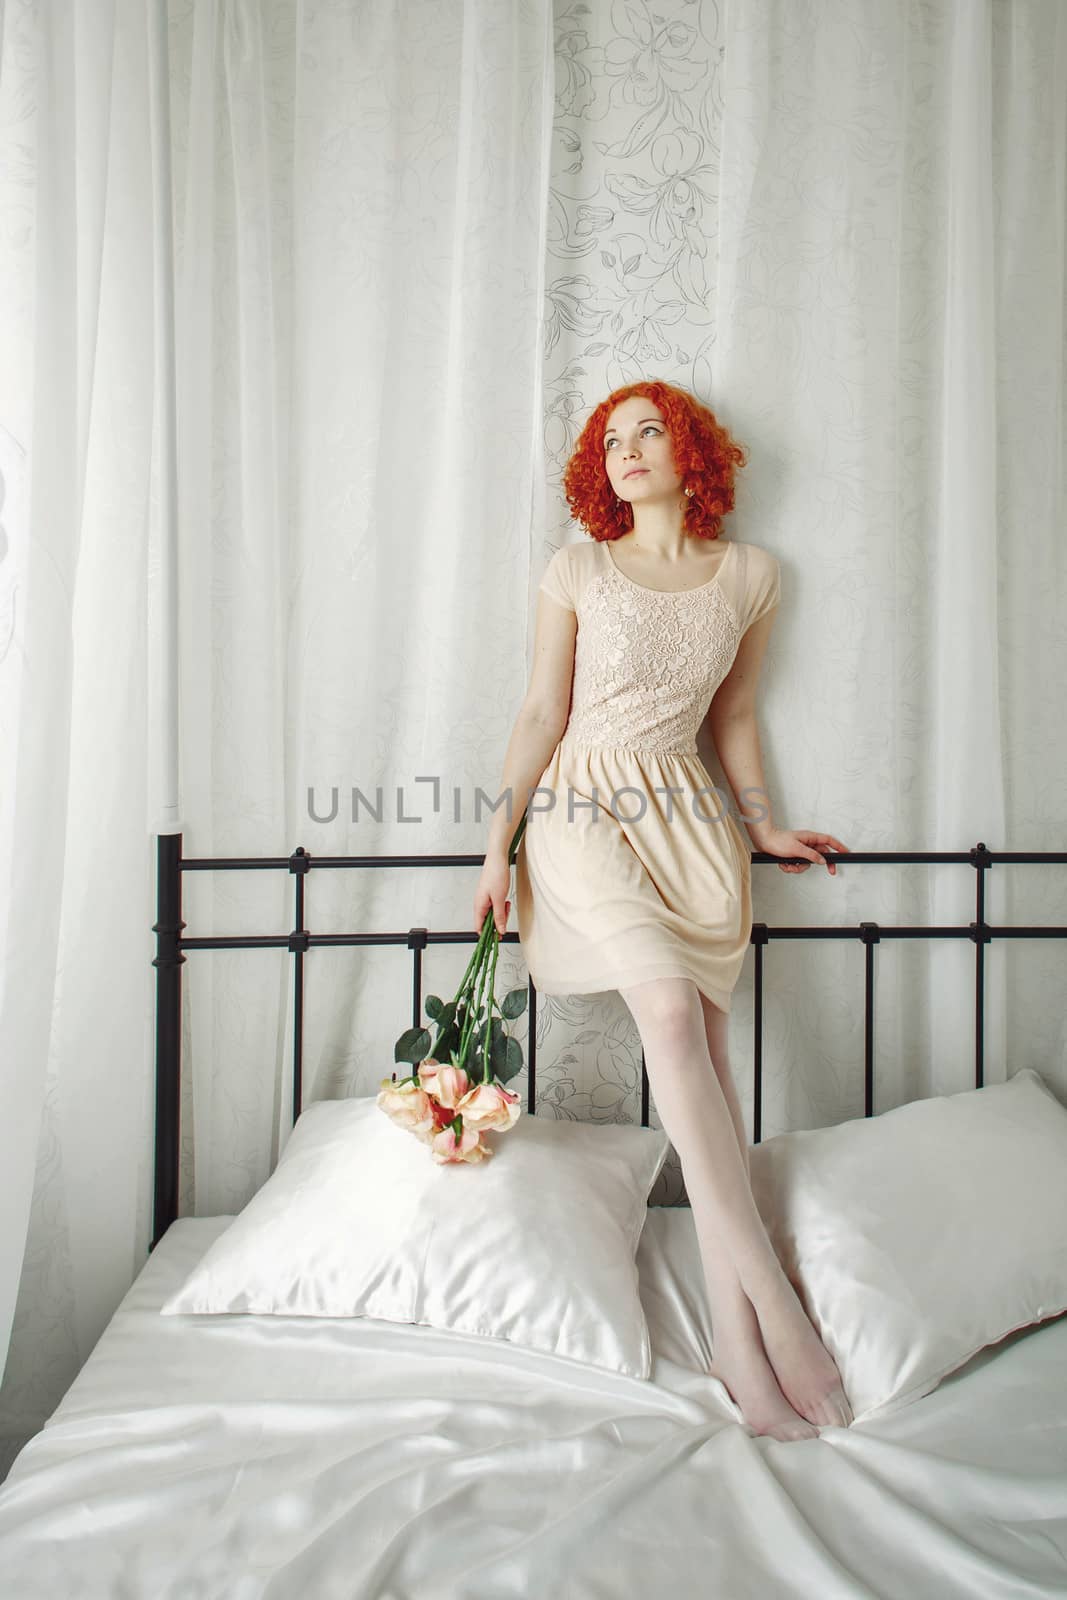 Red-haired girl in bedroom by Vagengeym